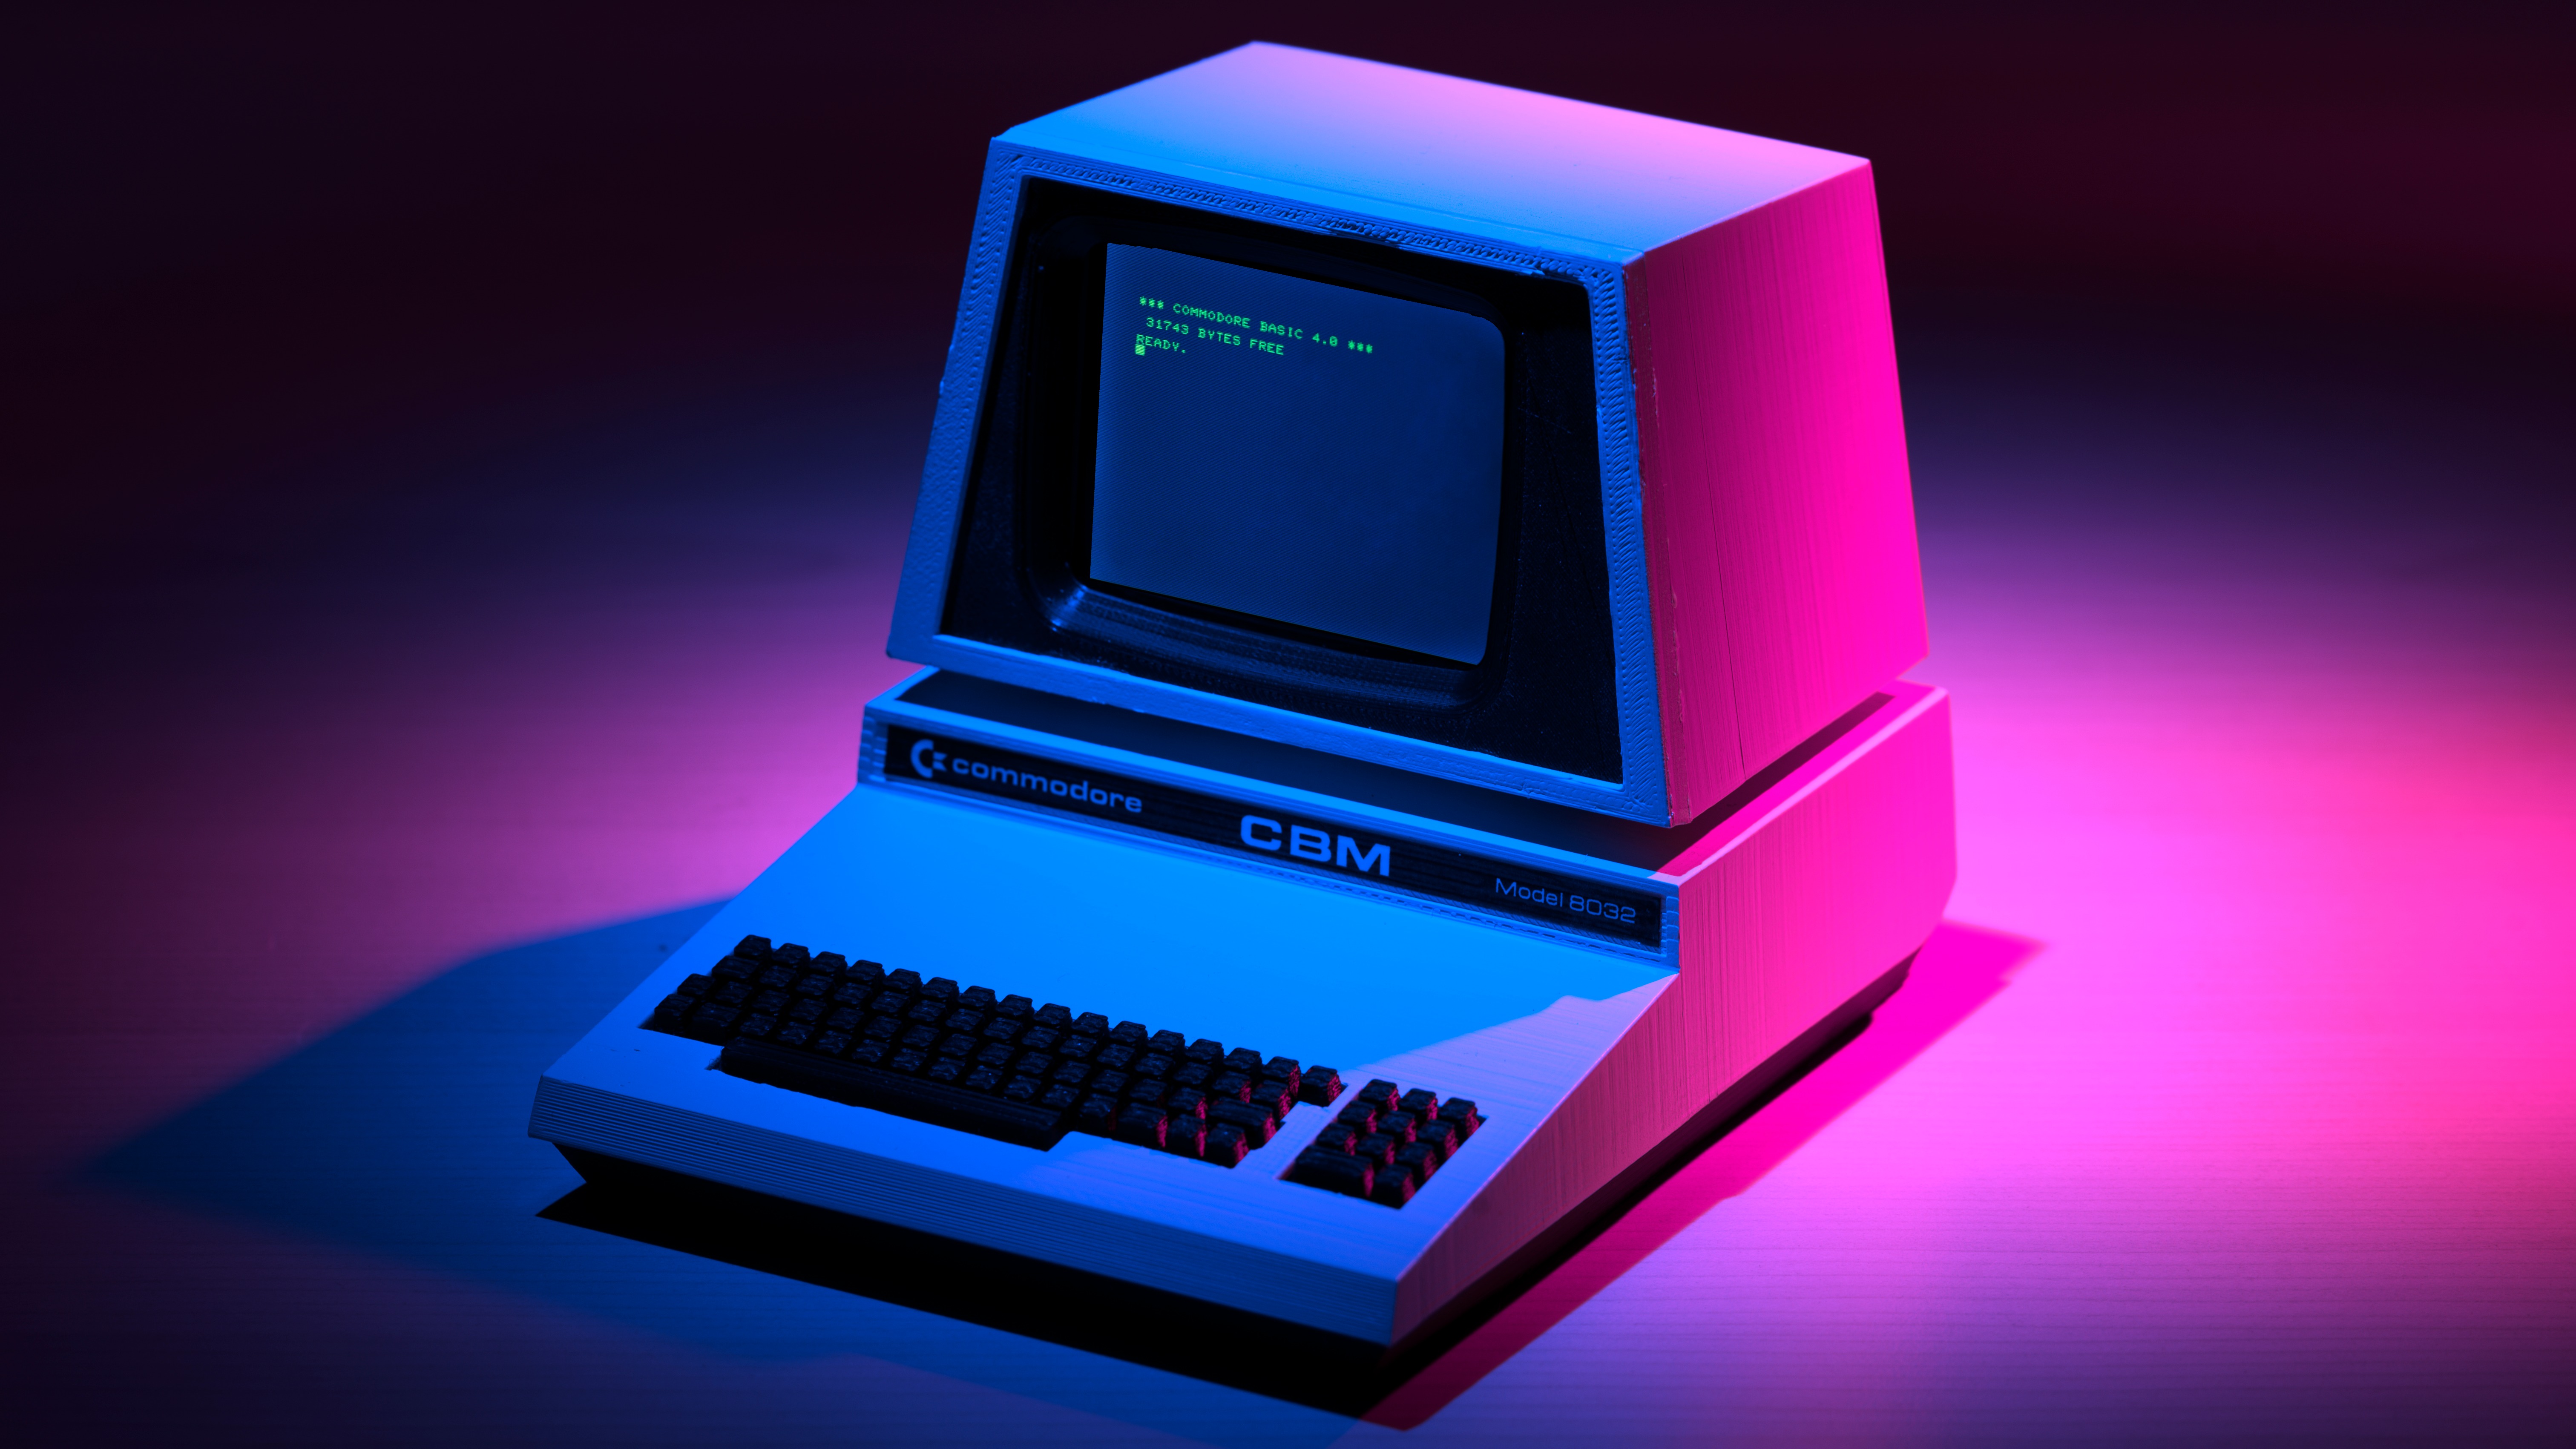 Don't be afraid of the dark - Commodore computer